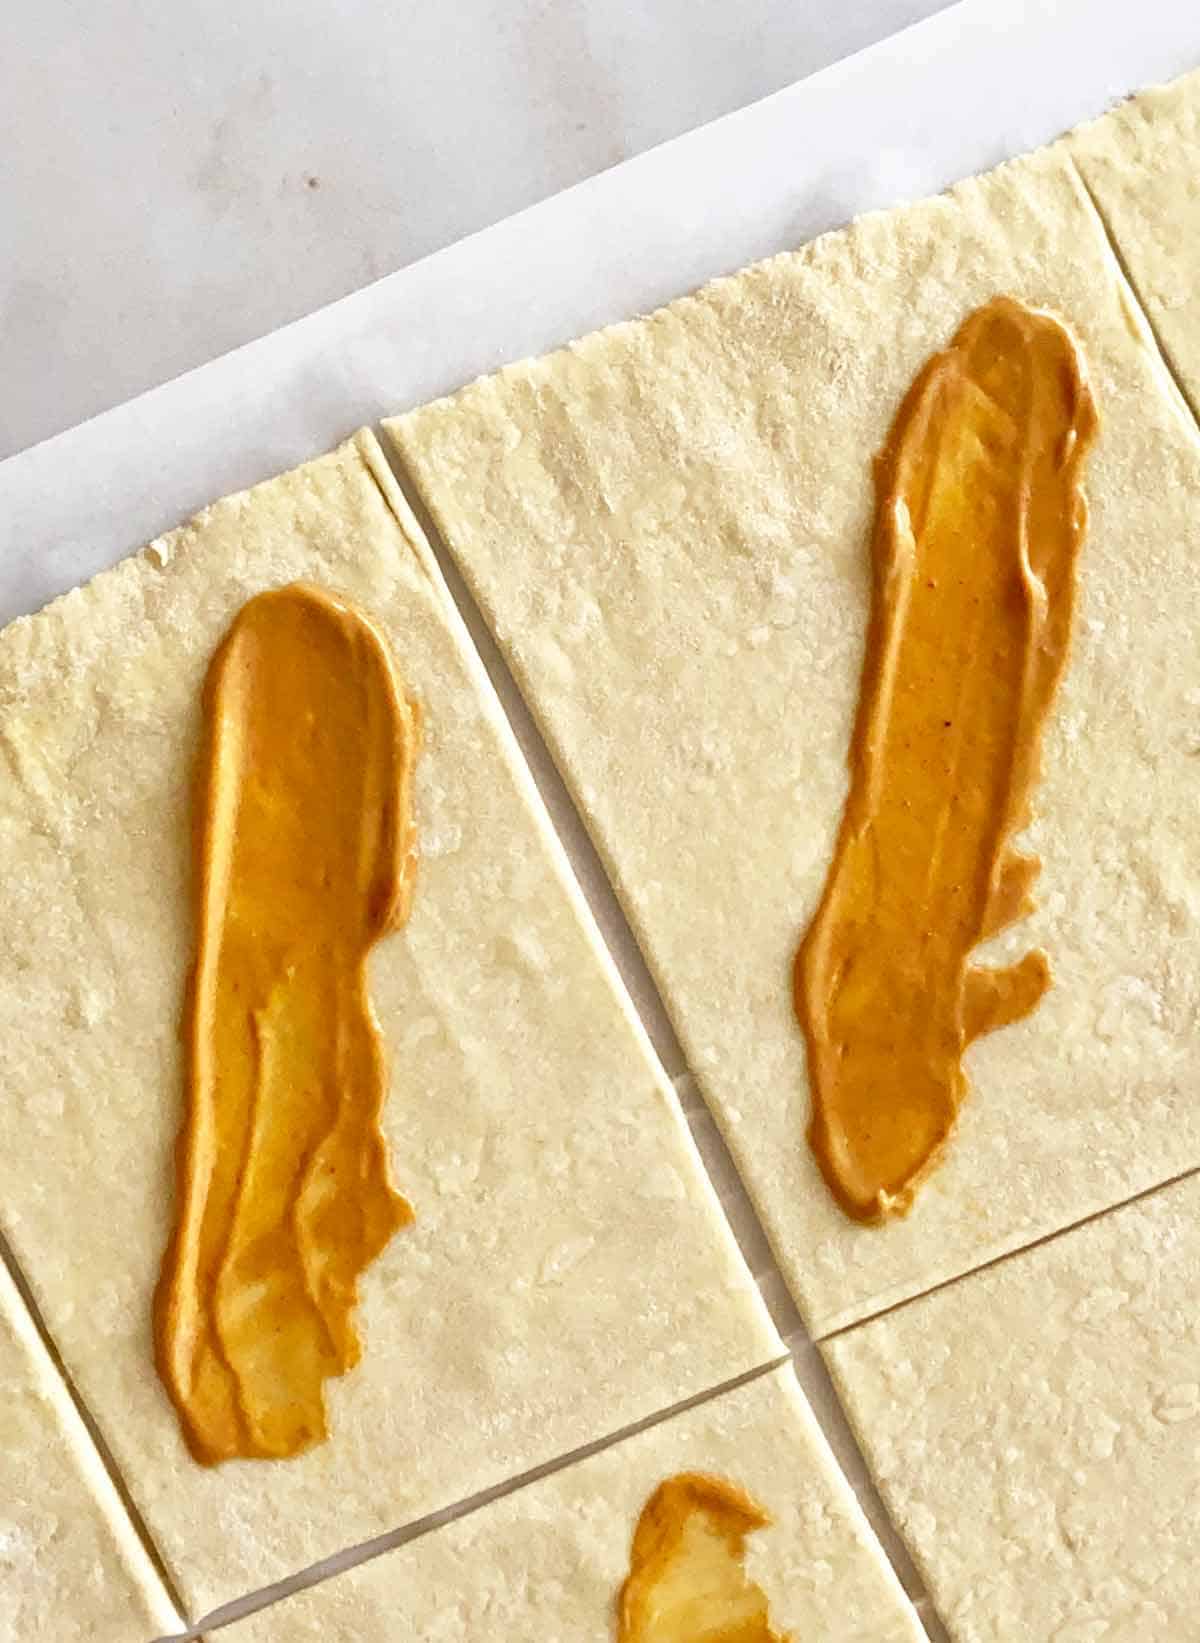 Spreading spicy mustard on puff pastry rectangles.